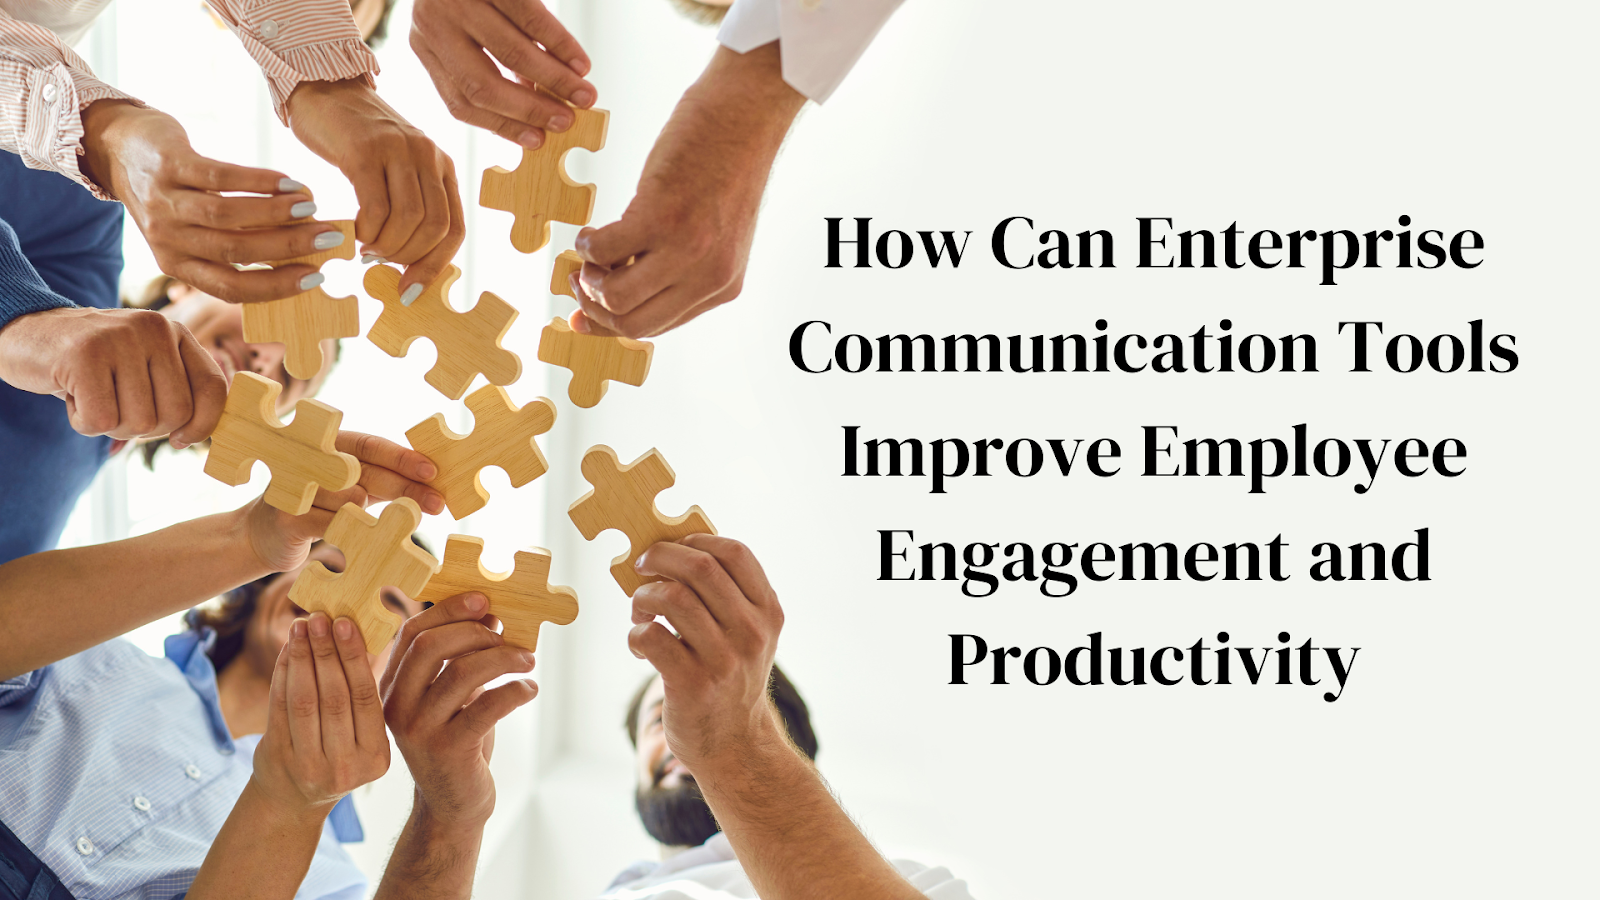 How Can Enterprise Communication Tools Improve Employee Engagement and Productivity?